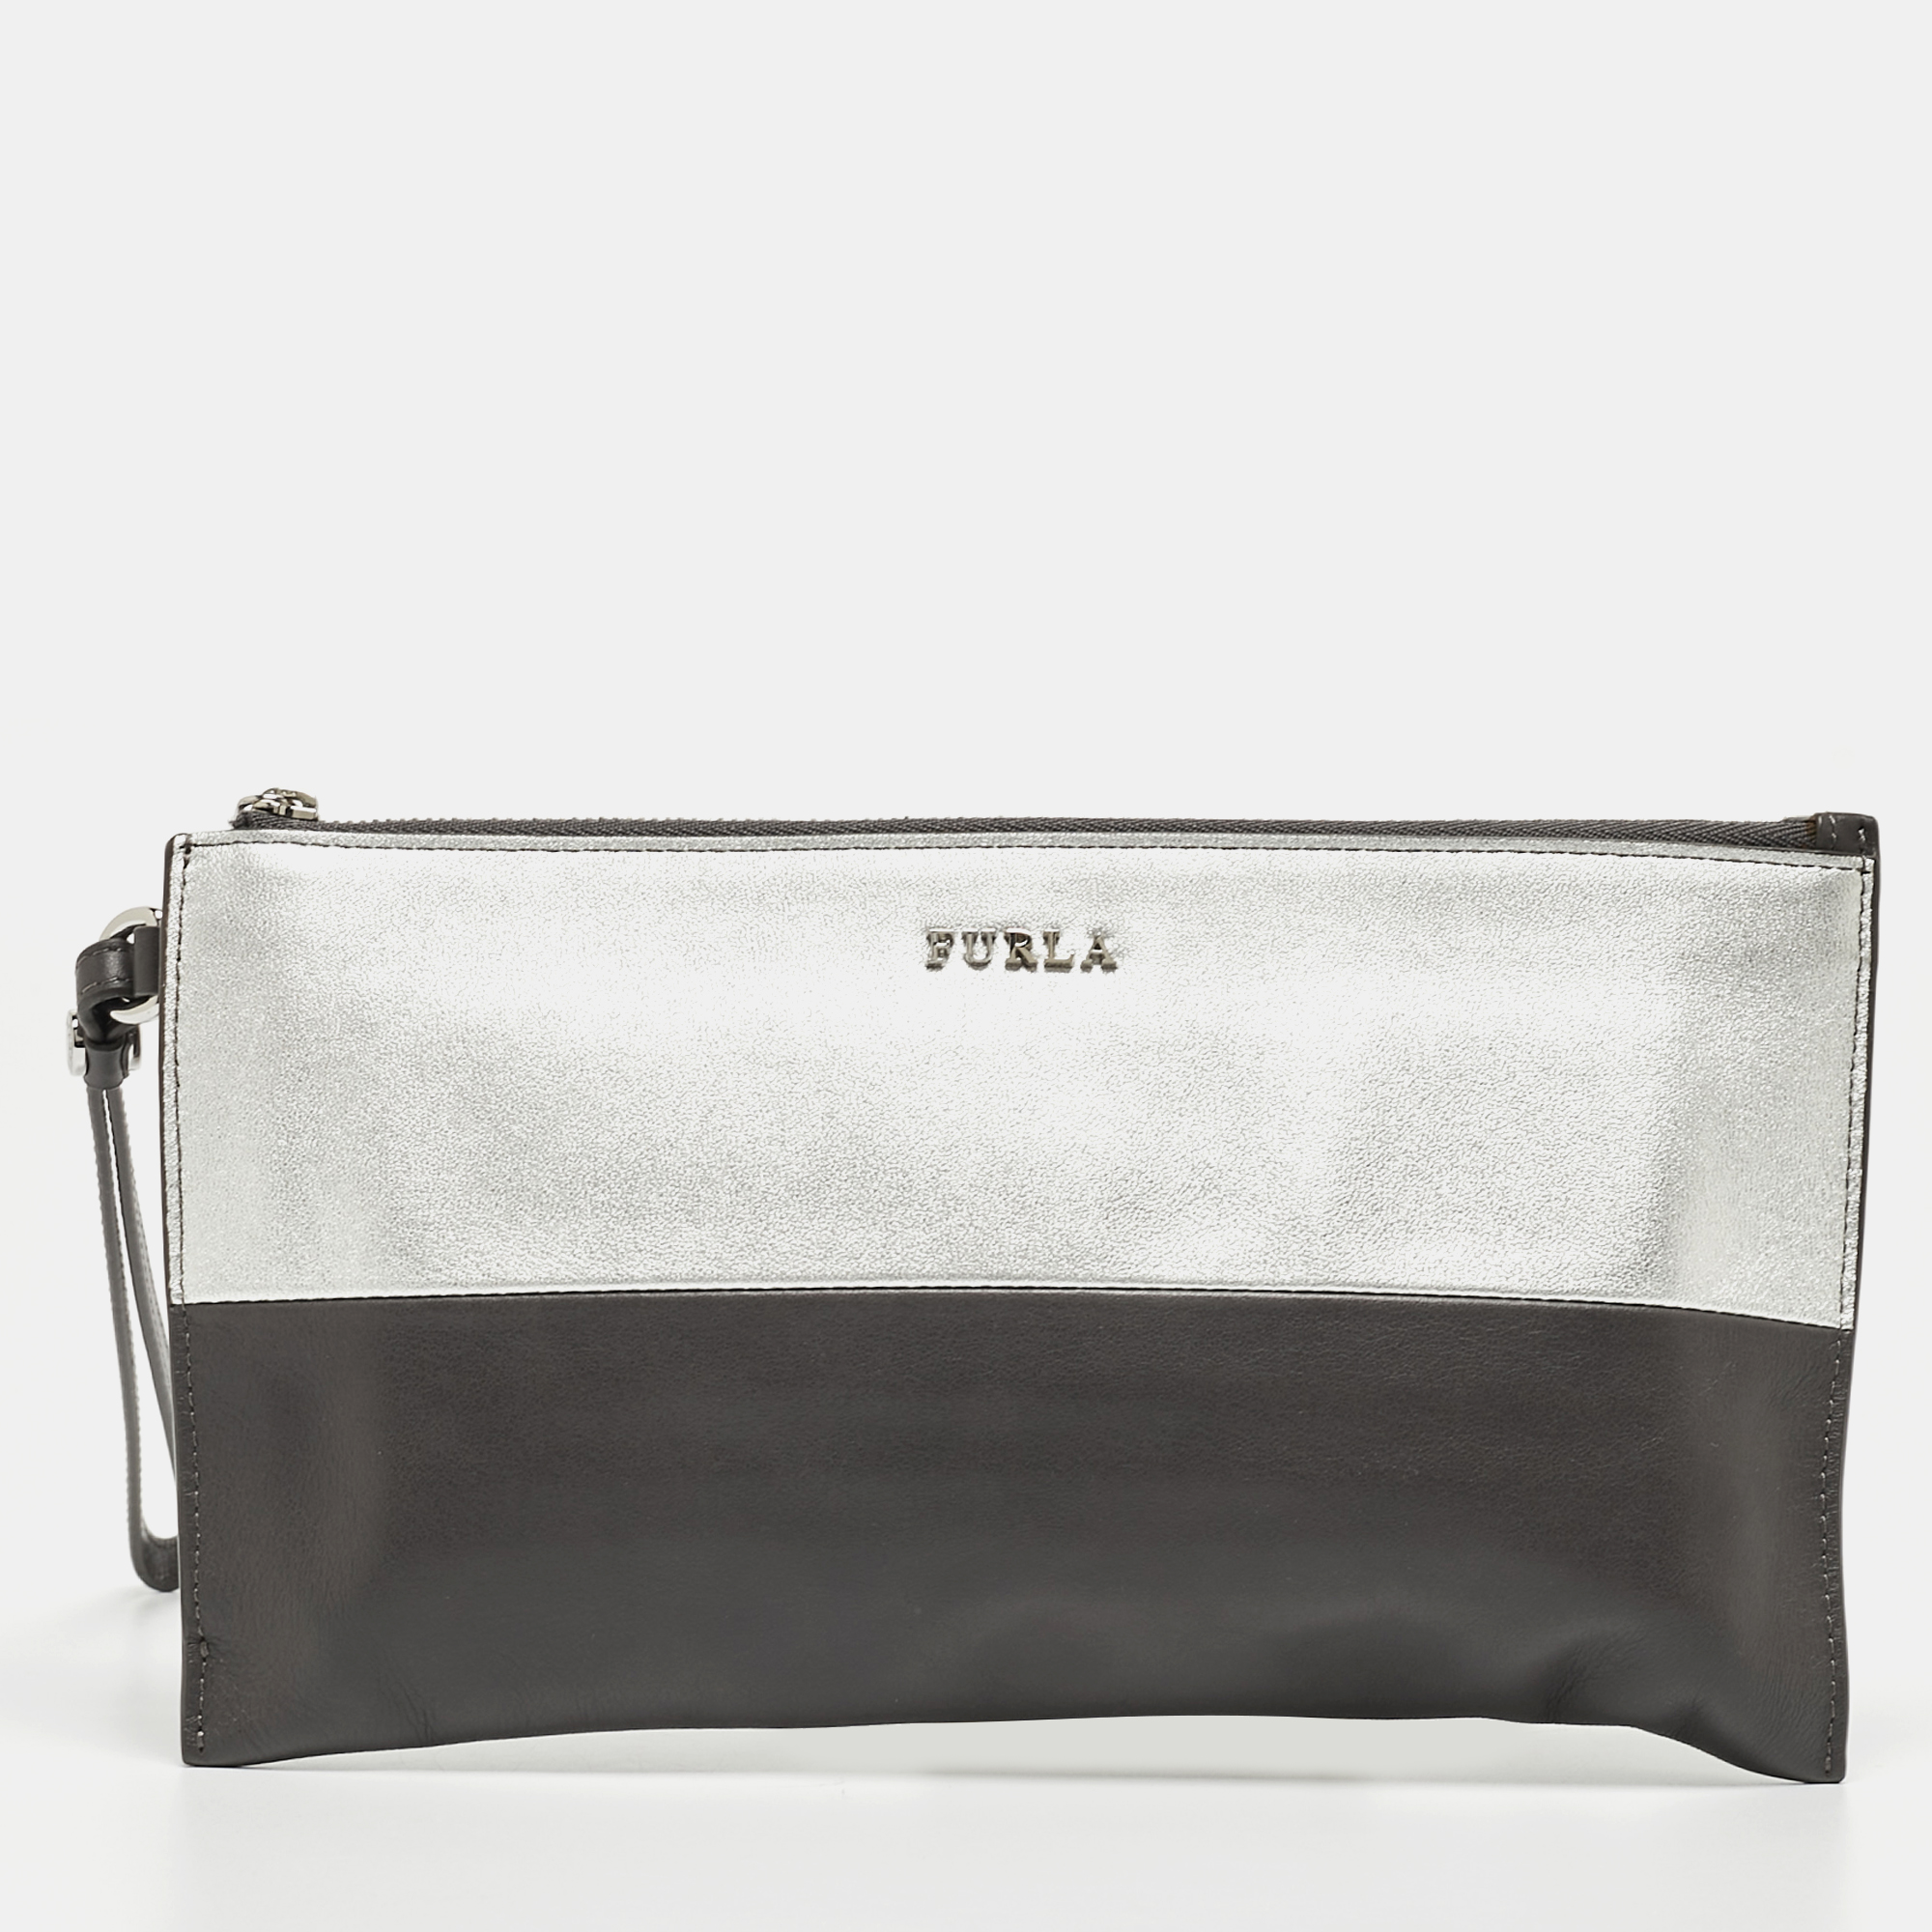 Pre-owned Furla Grey/silver Leather Zip Wristlet Pouch